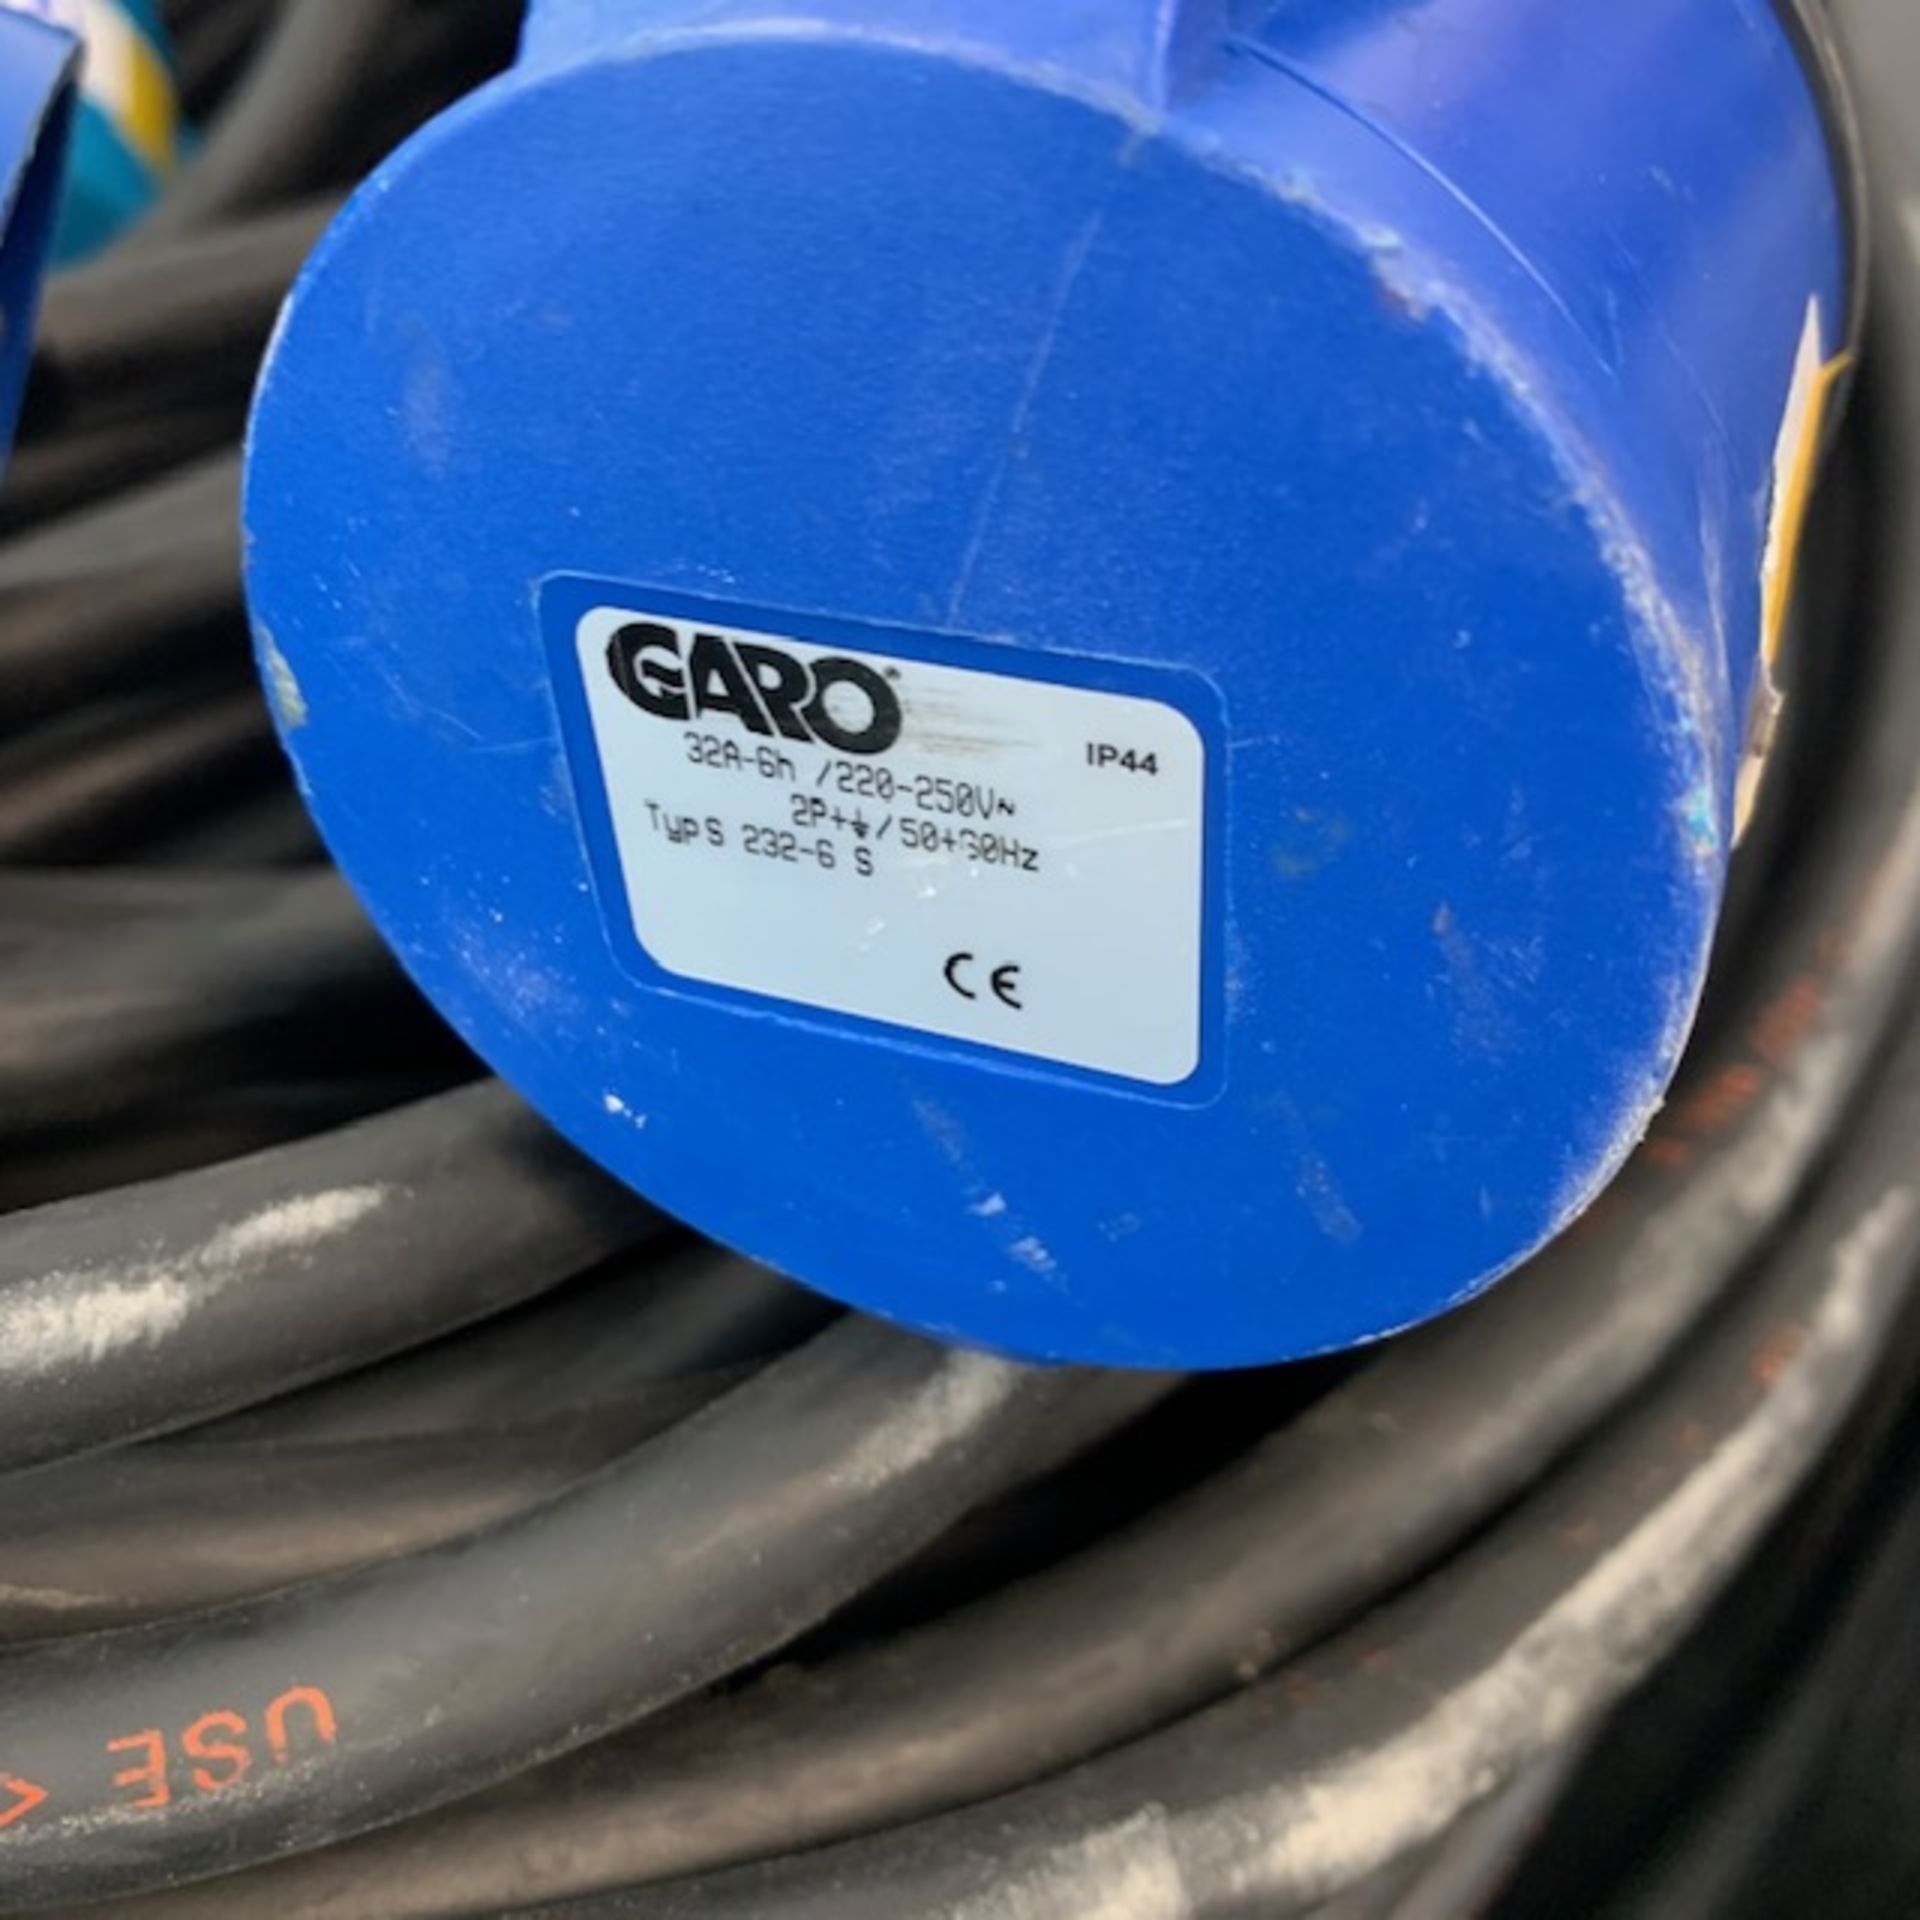 2 X 32Amp Single Phase 30M Cable - Ref: 1350 - CL581 - Location: Altrincham WA14Items will be - Image 2 of 2